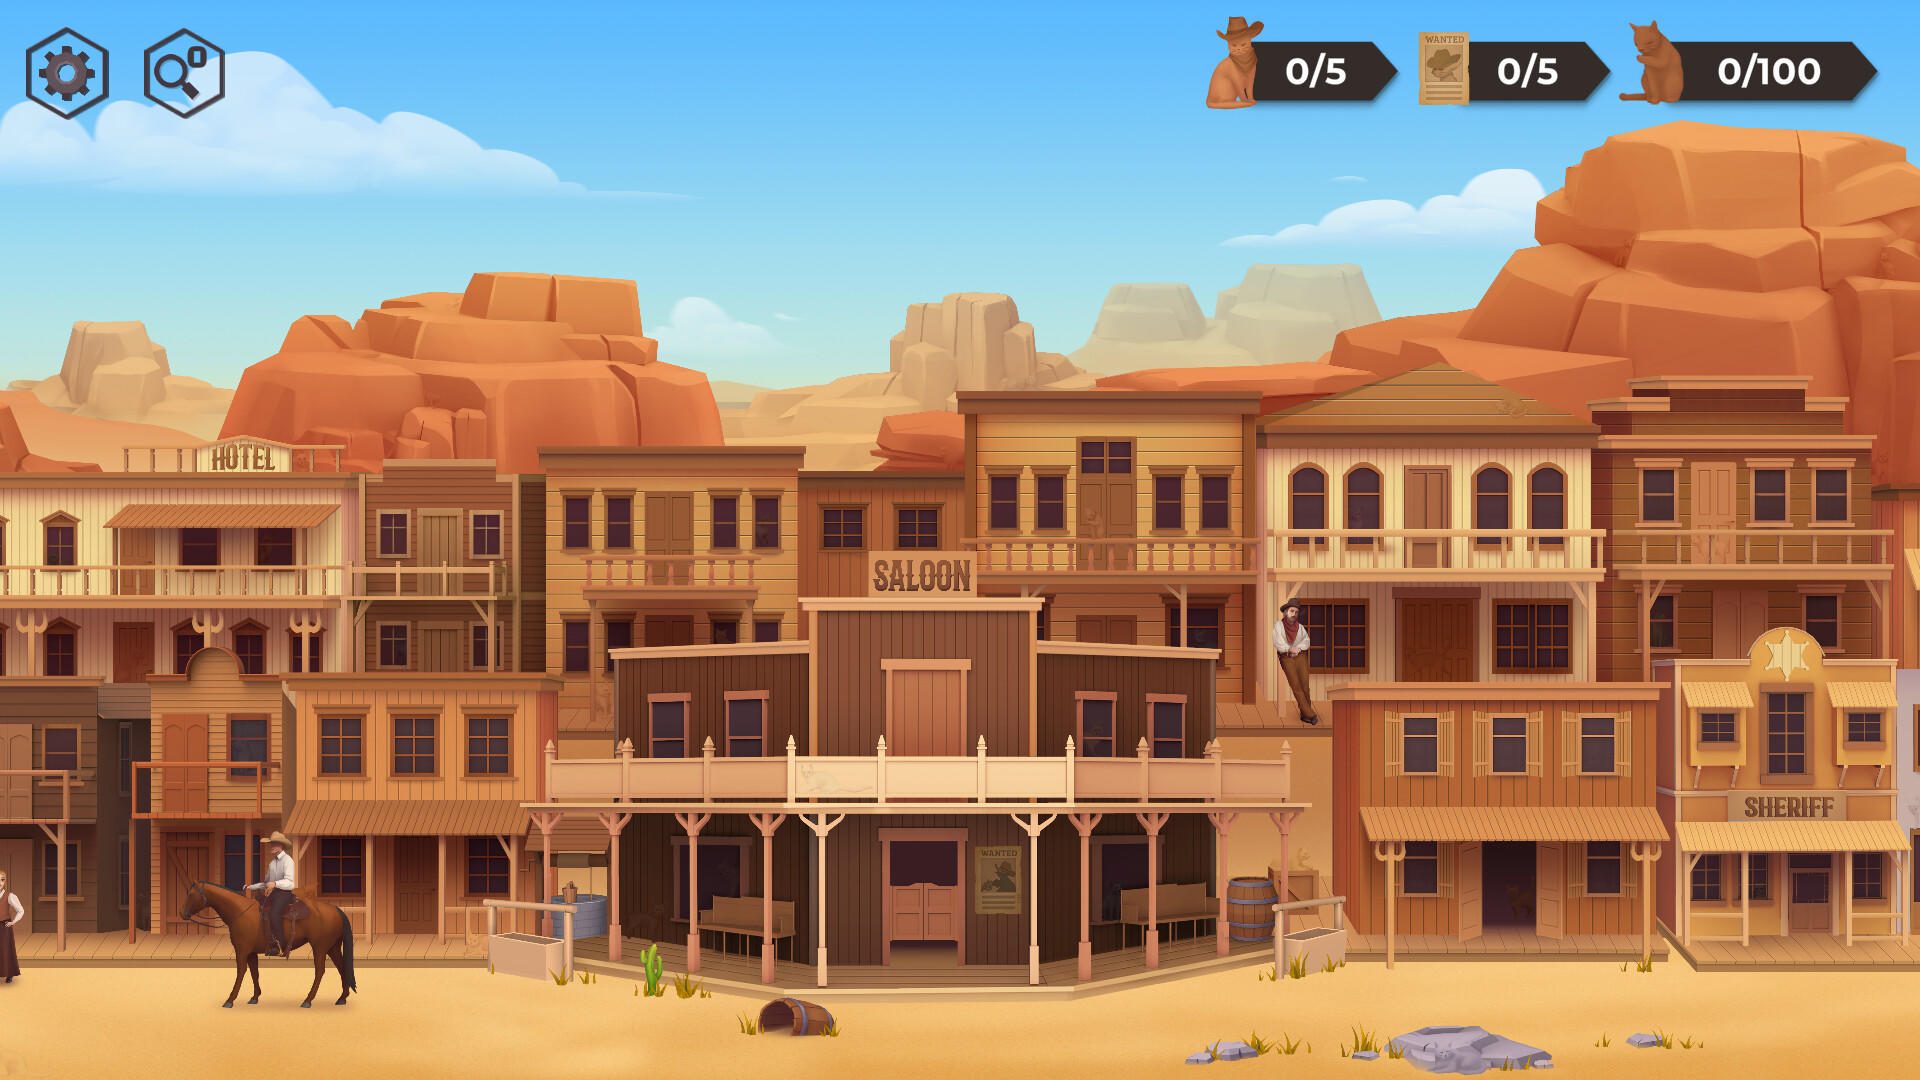 Screenshot 1 of Cat Search In The Wild West 